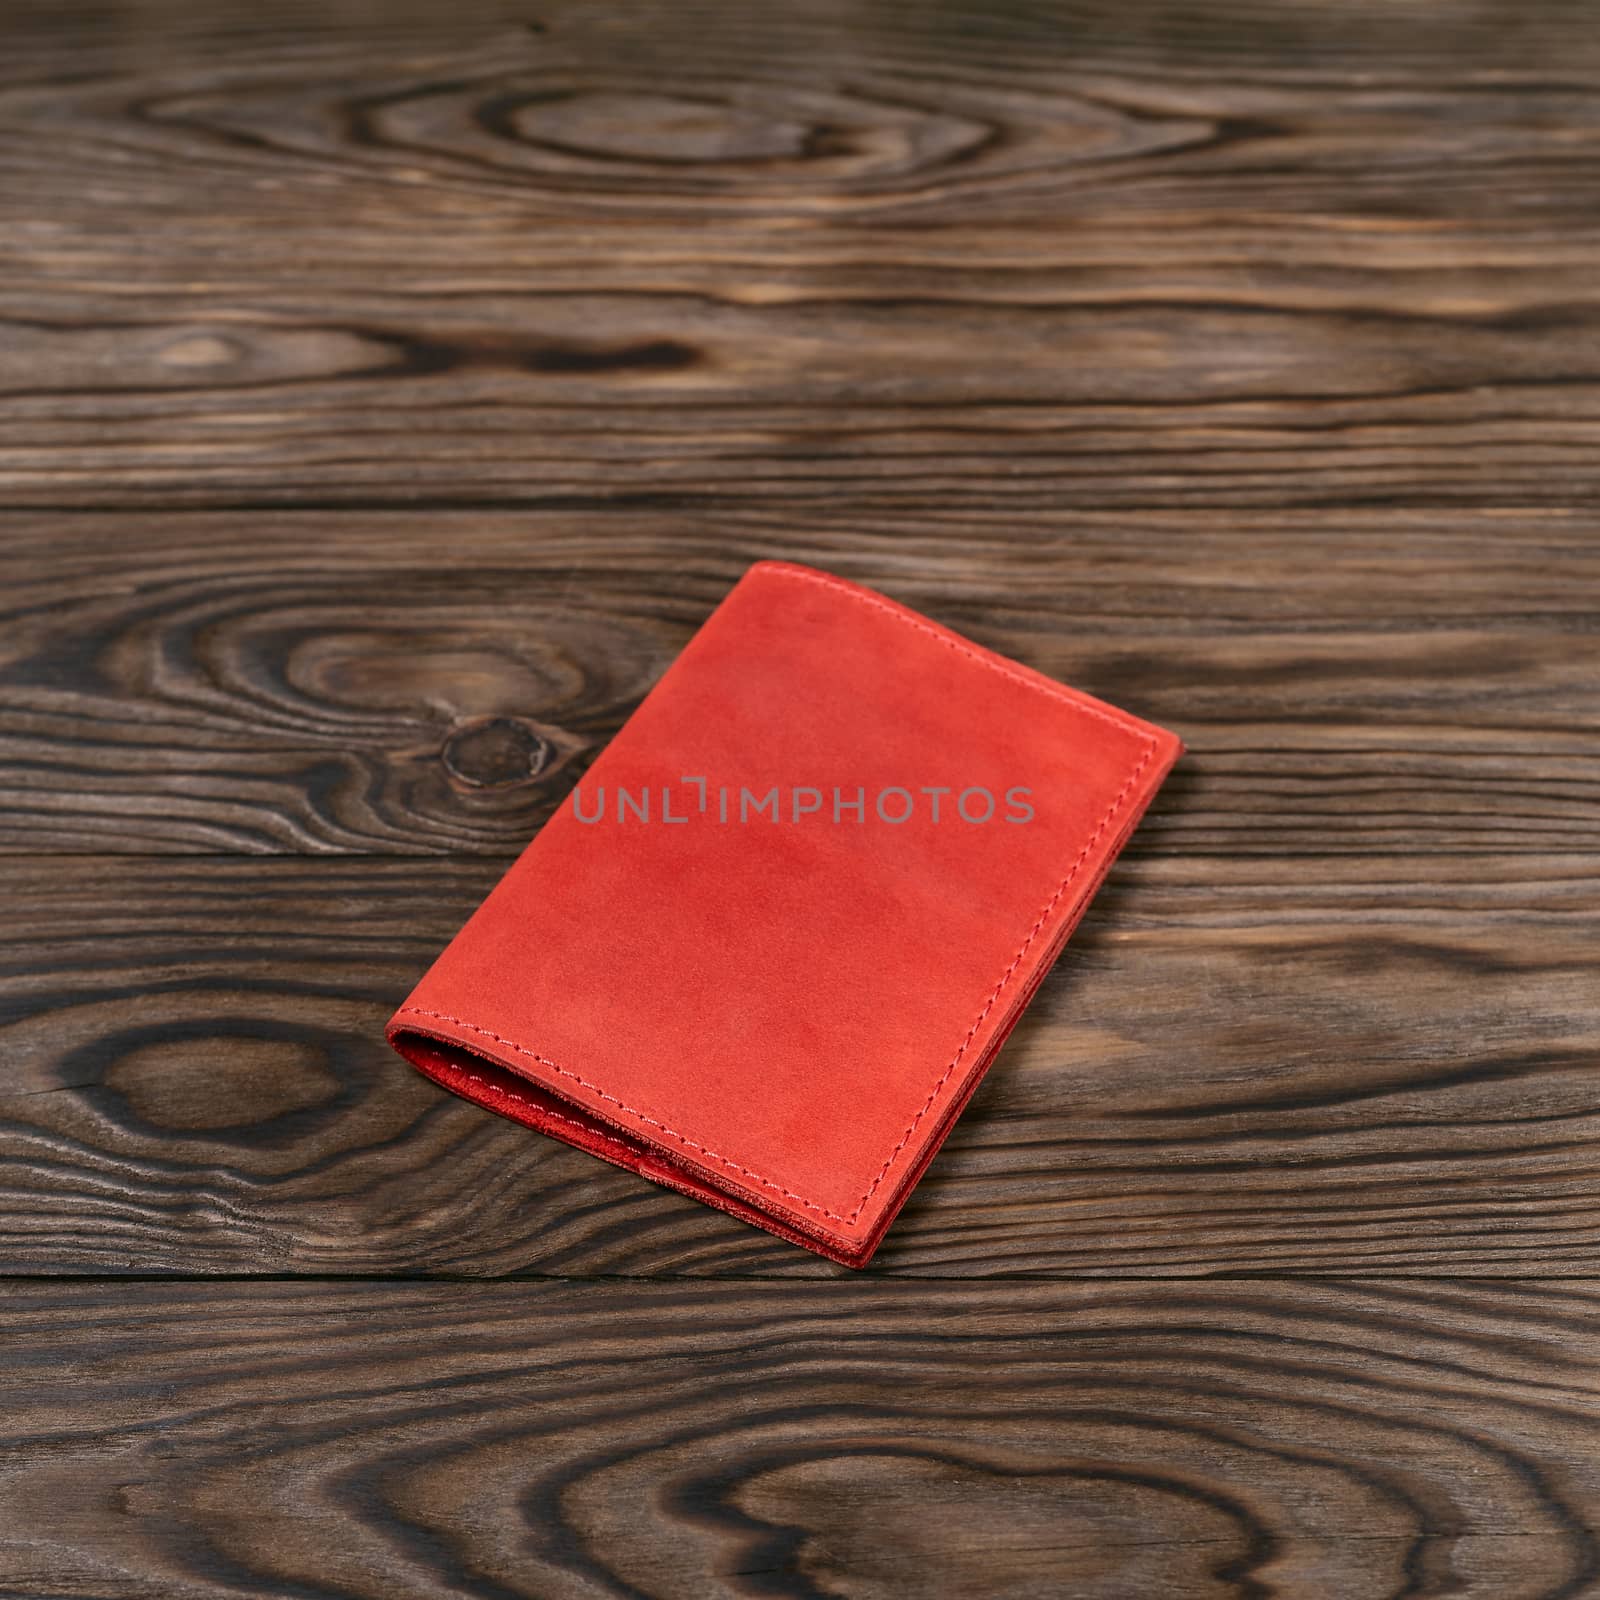 Red color handmade leather passport cover on wooden textured background. Businessman`s accessory.